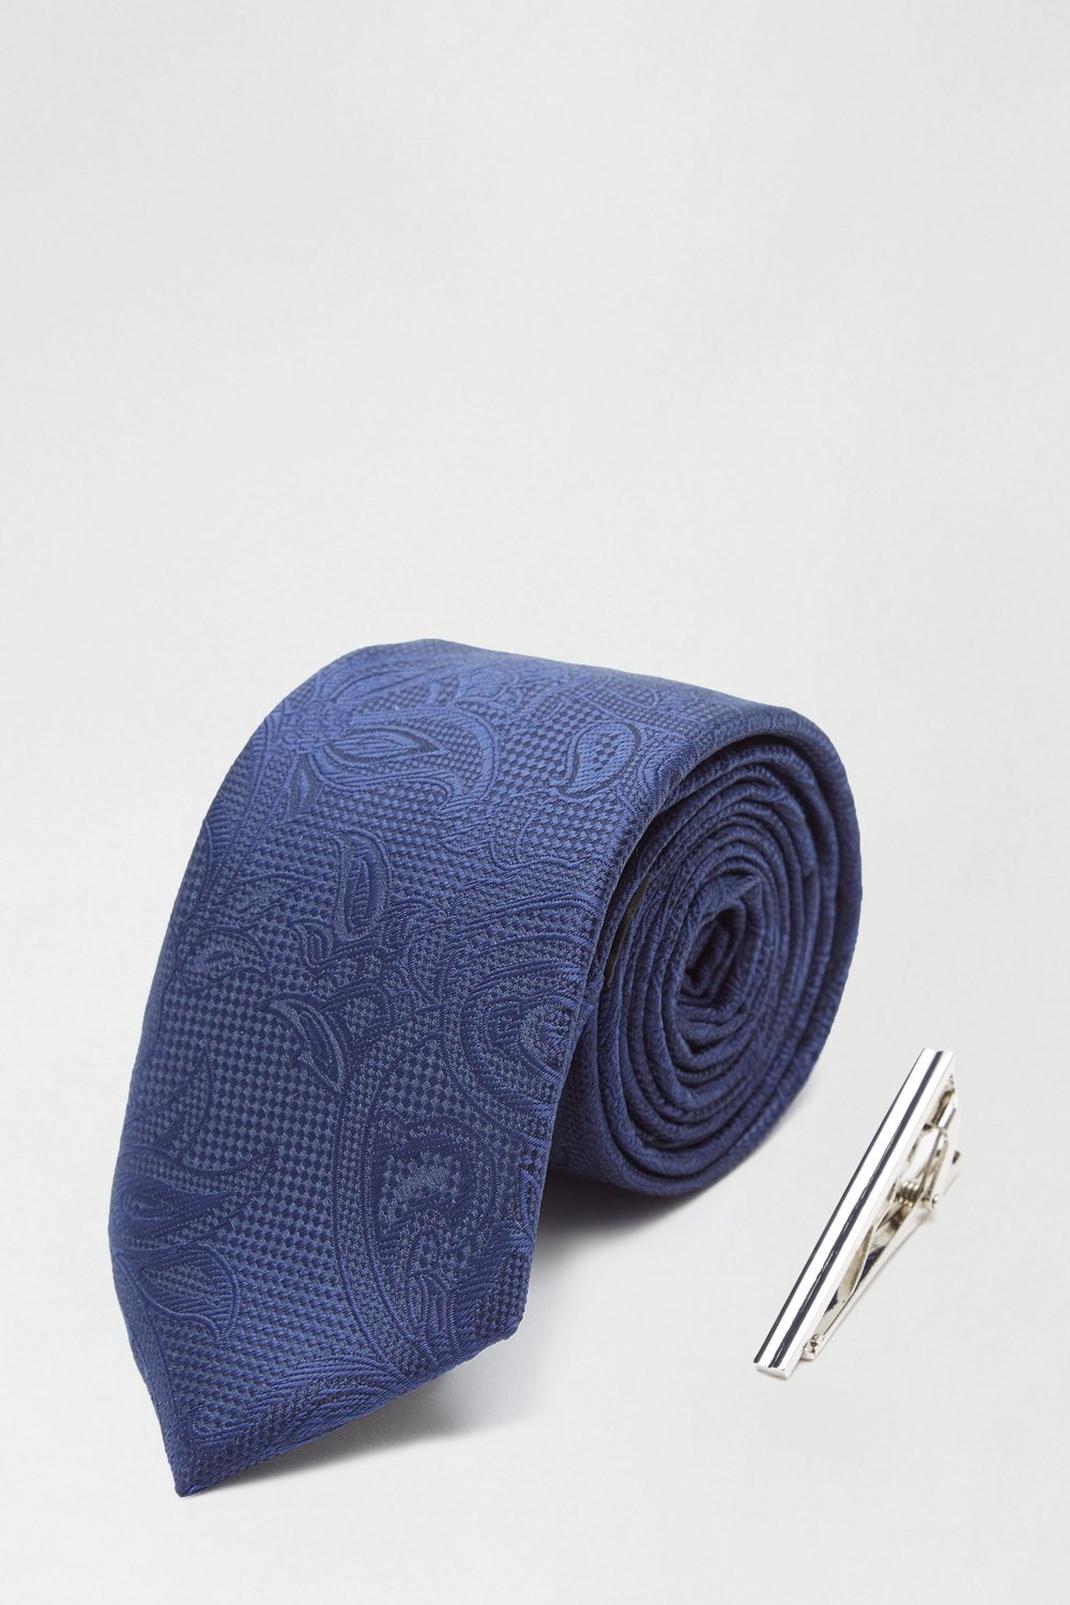 148 Tonal Navy Paisley Tie And Tie Bar image number 1